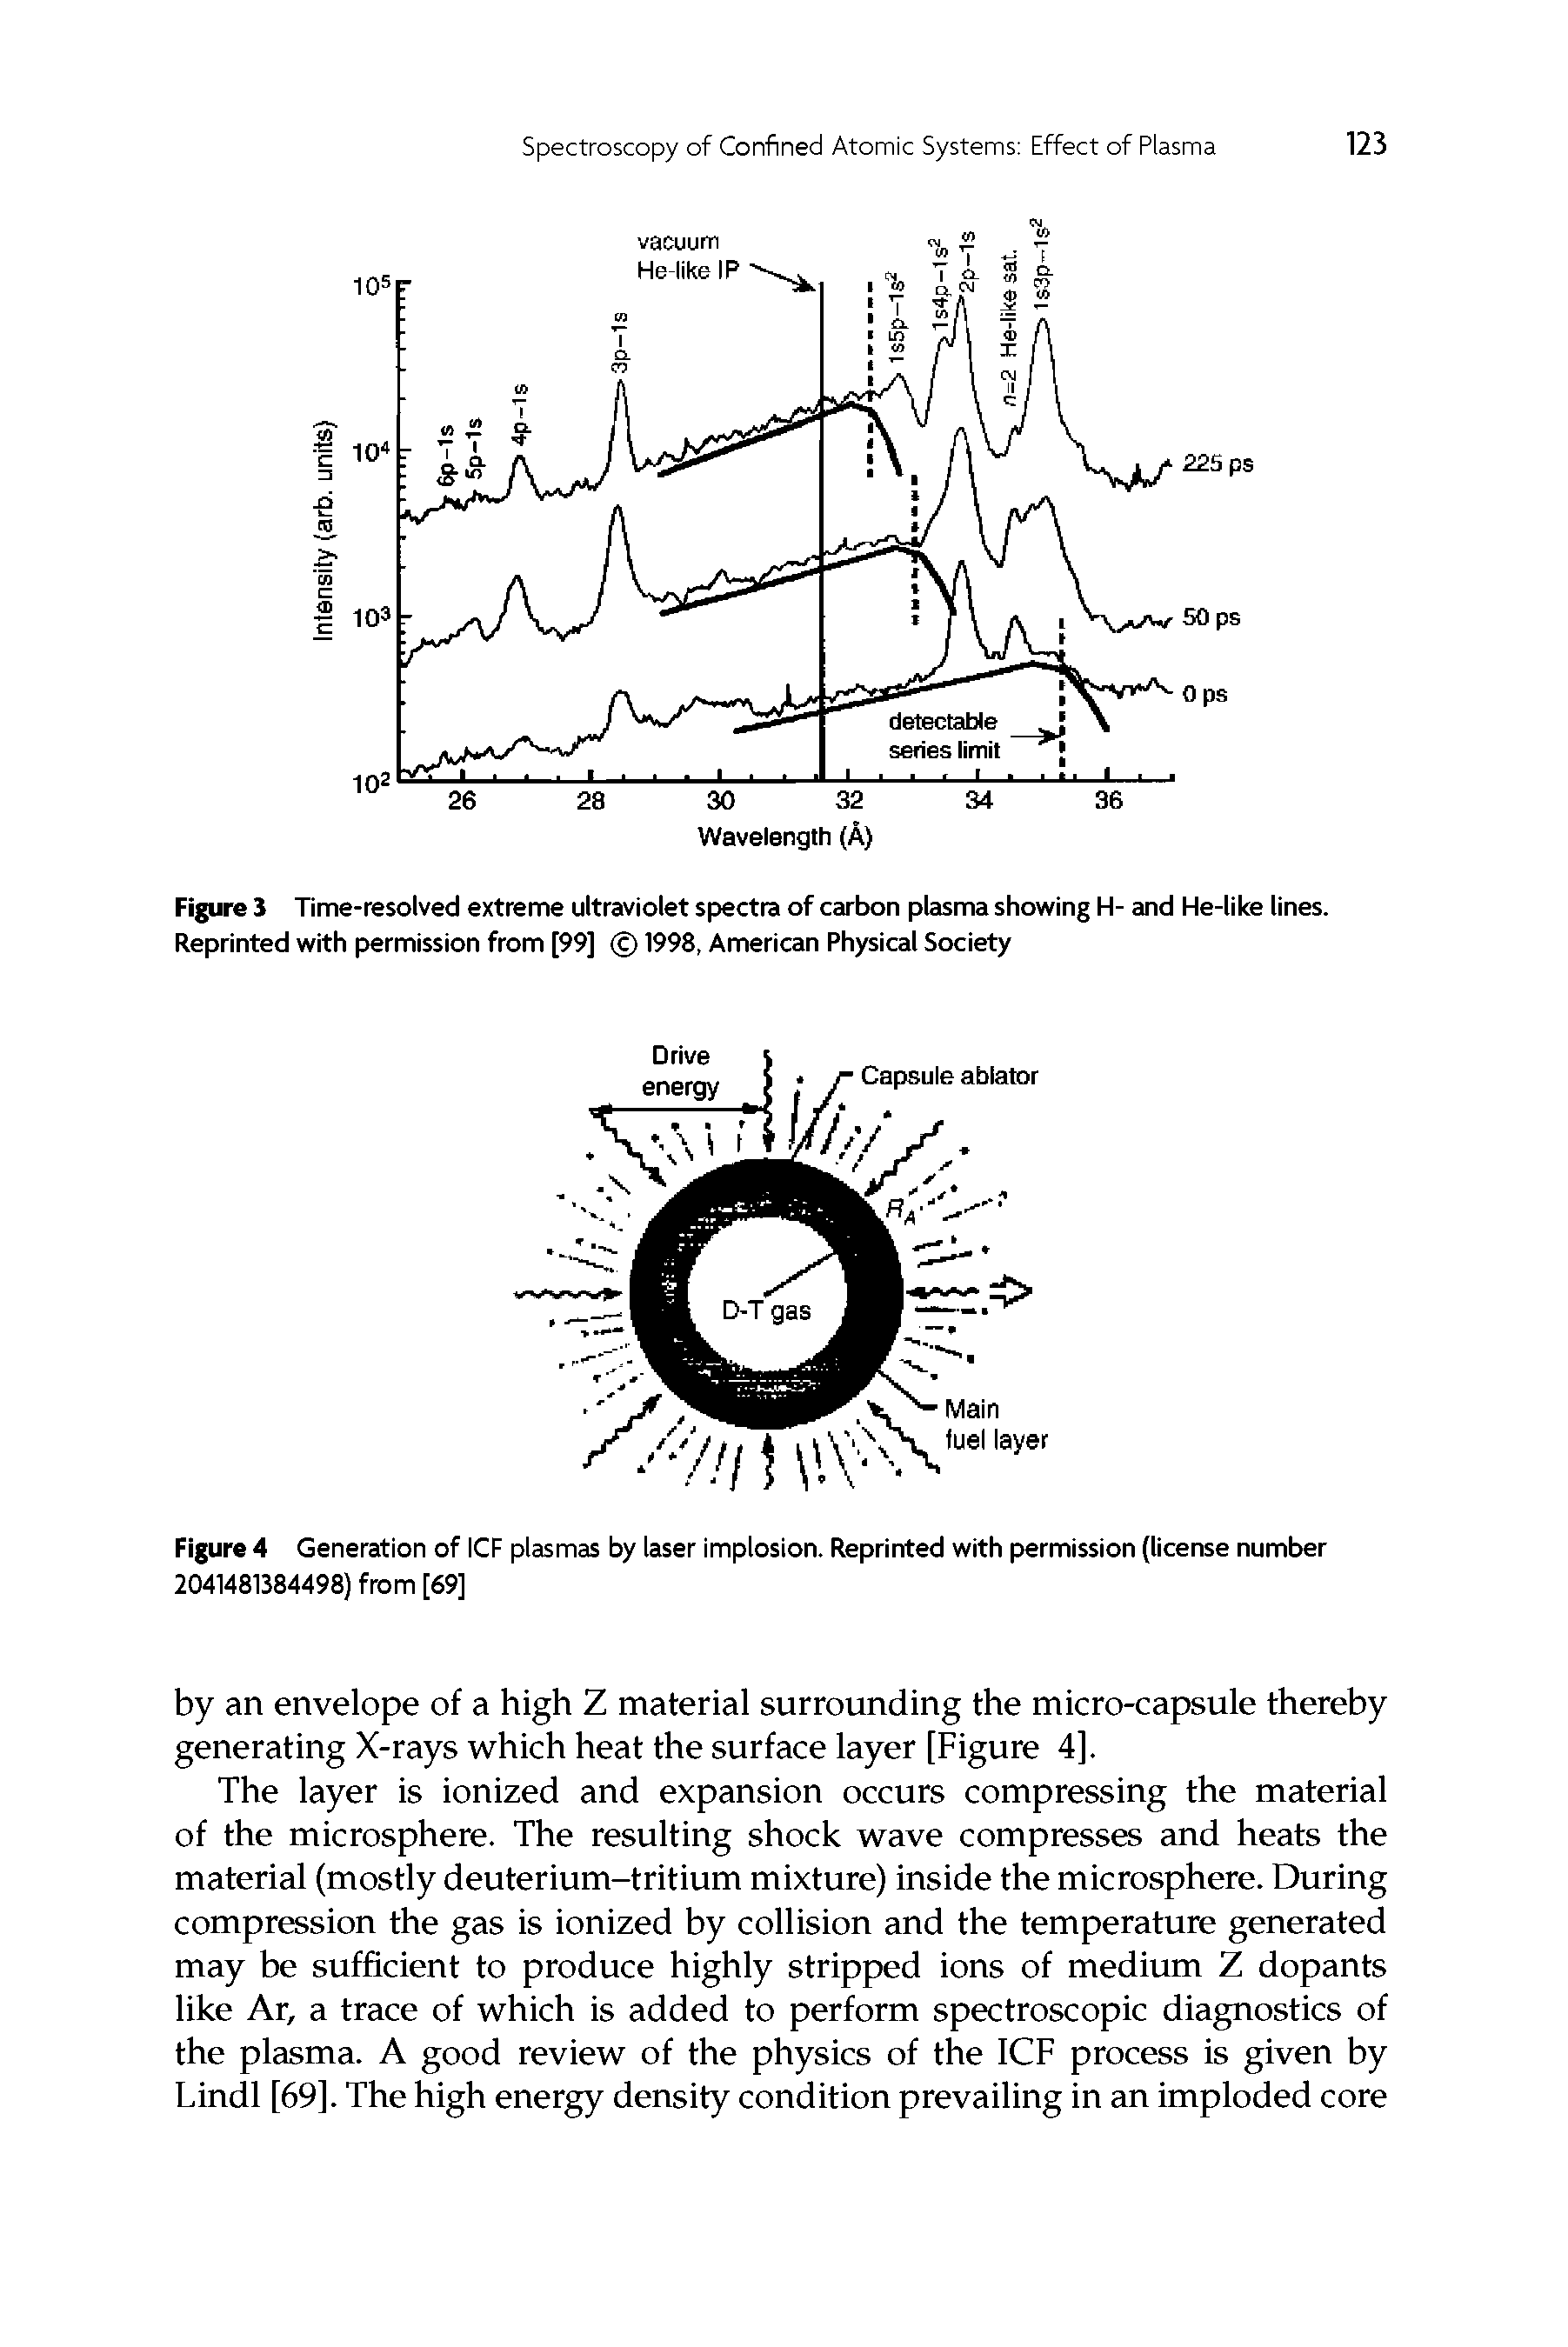 Figure 3 Time-resolved extreme ultraviolet spectra of carbon plasma showing H- and He-like lines. Reprinted with permission from [99] 1998, American Physical Society...